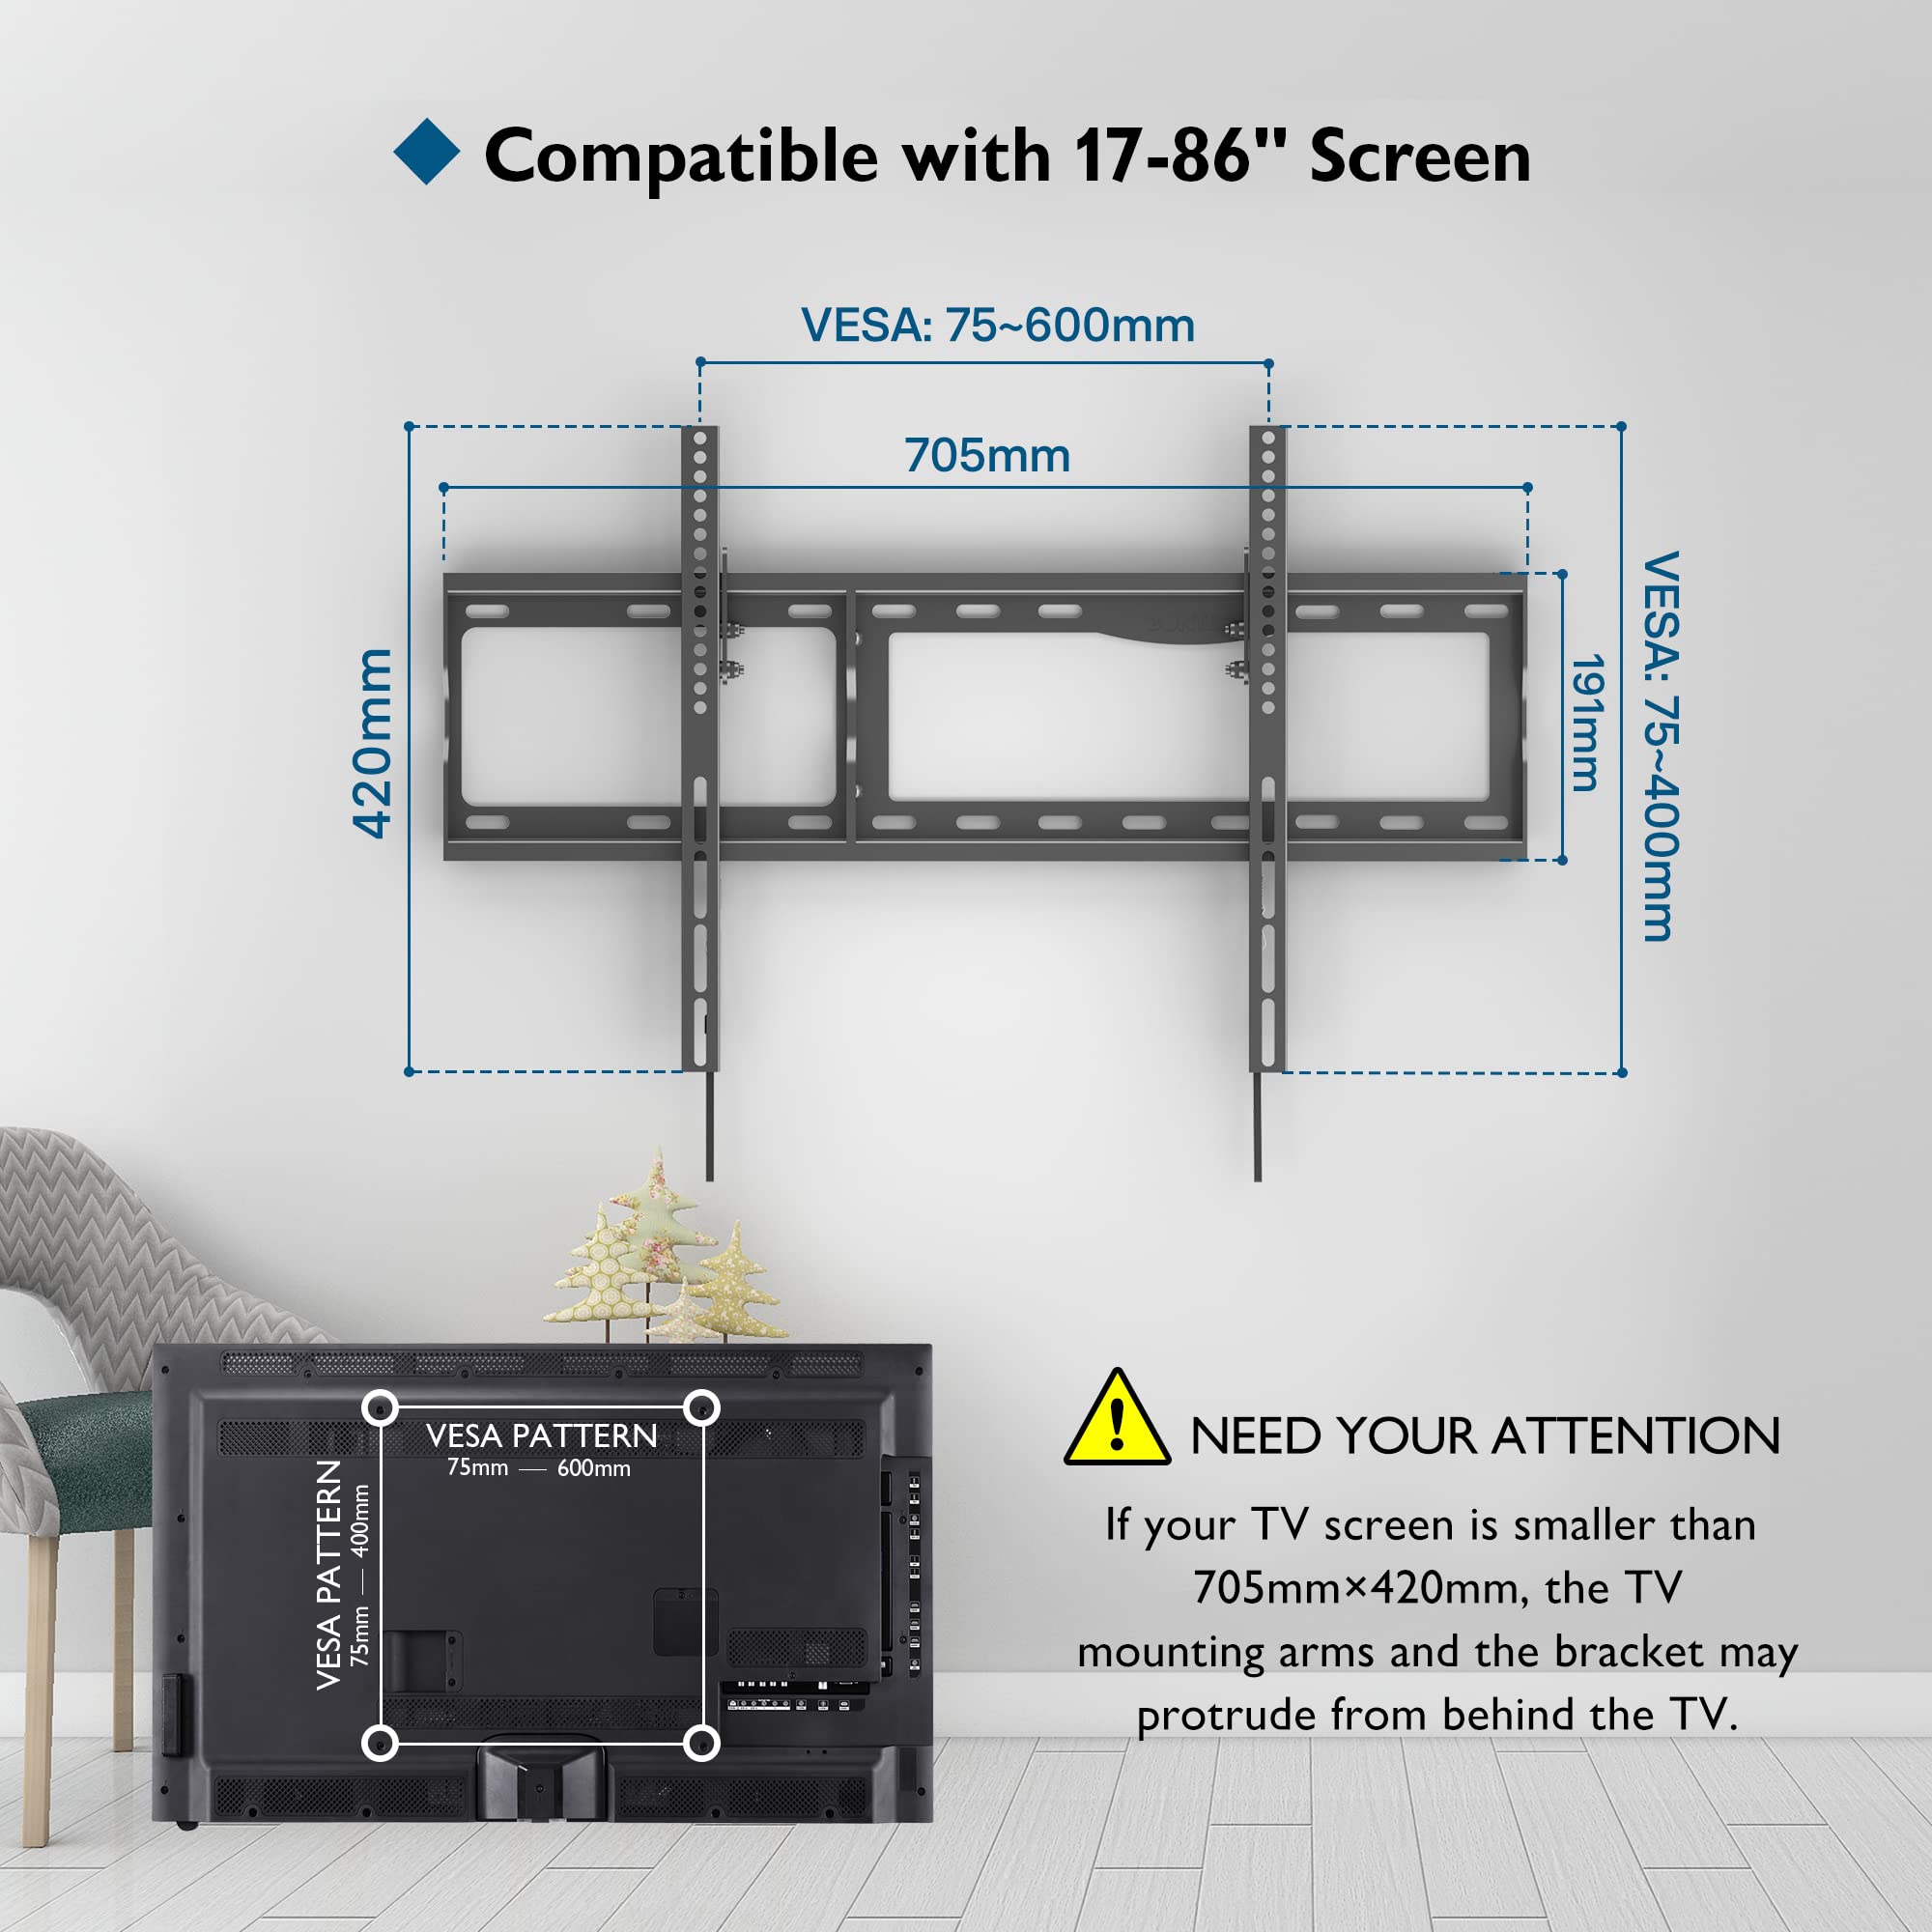 BONTEC Tilting TV Wall Mount for Most 17-86 inch LED OLED LCD Flat Curved Screen TVs, TV Wall Bracket Holds up to 165LBS, Max VESA 600 x400mm